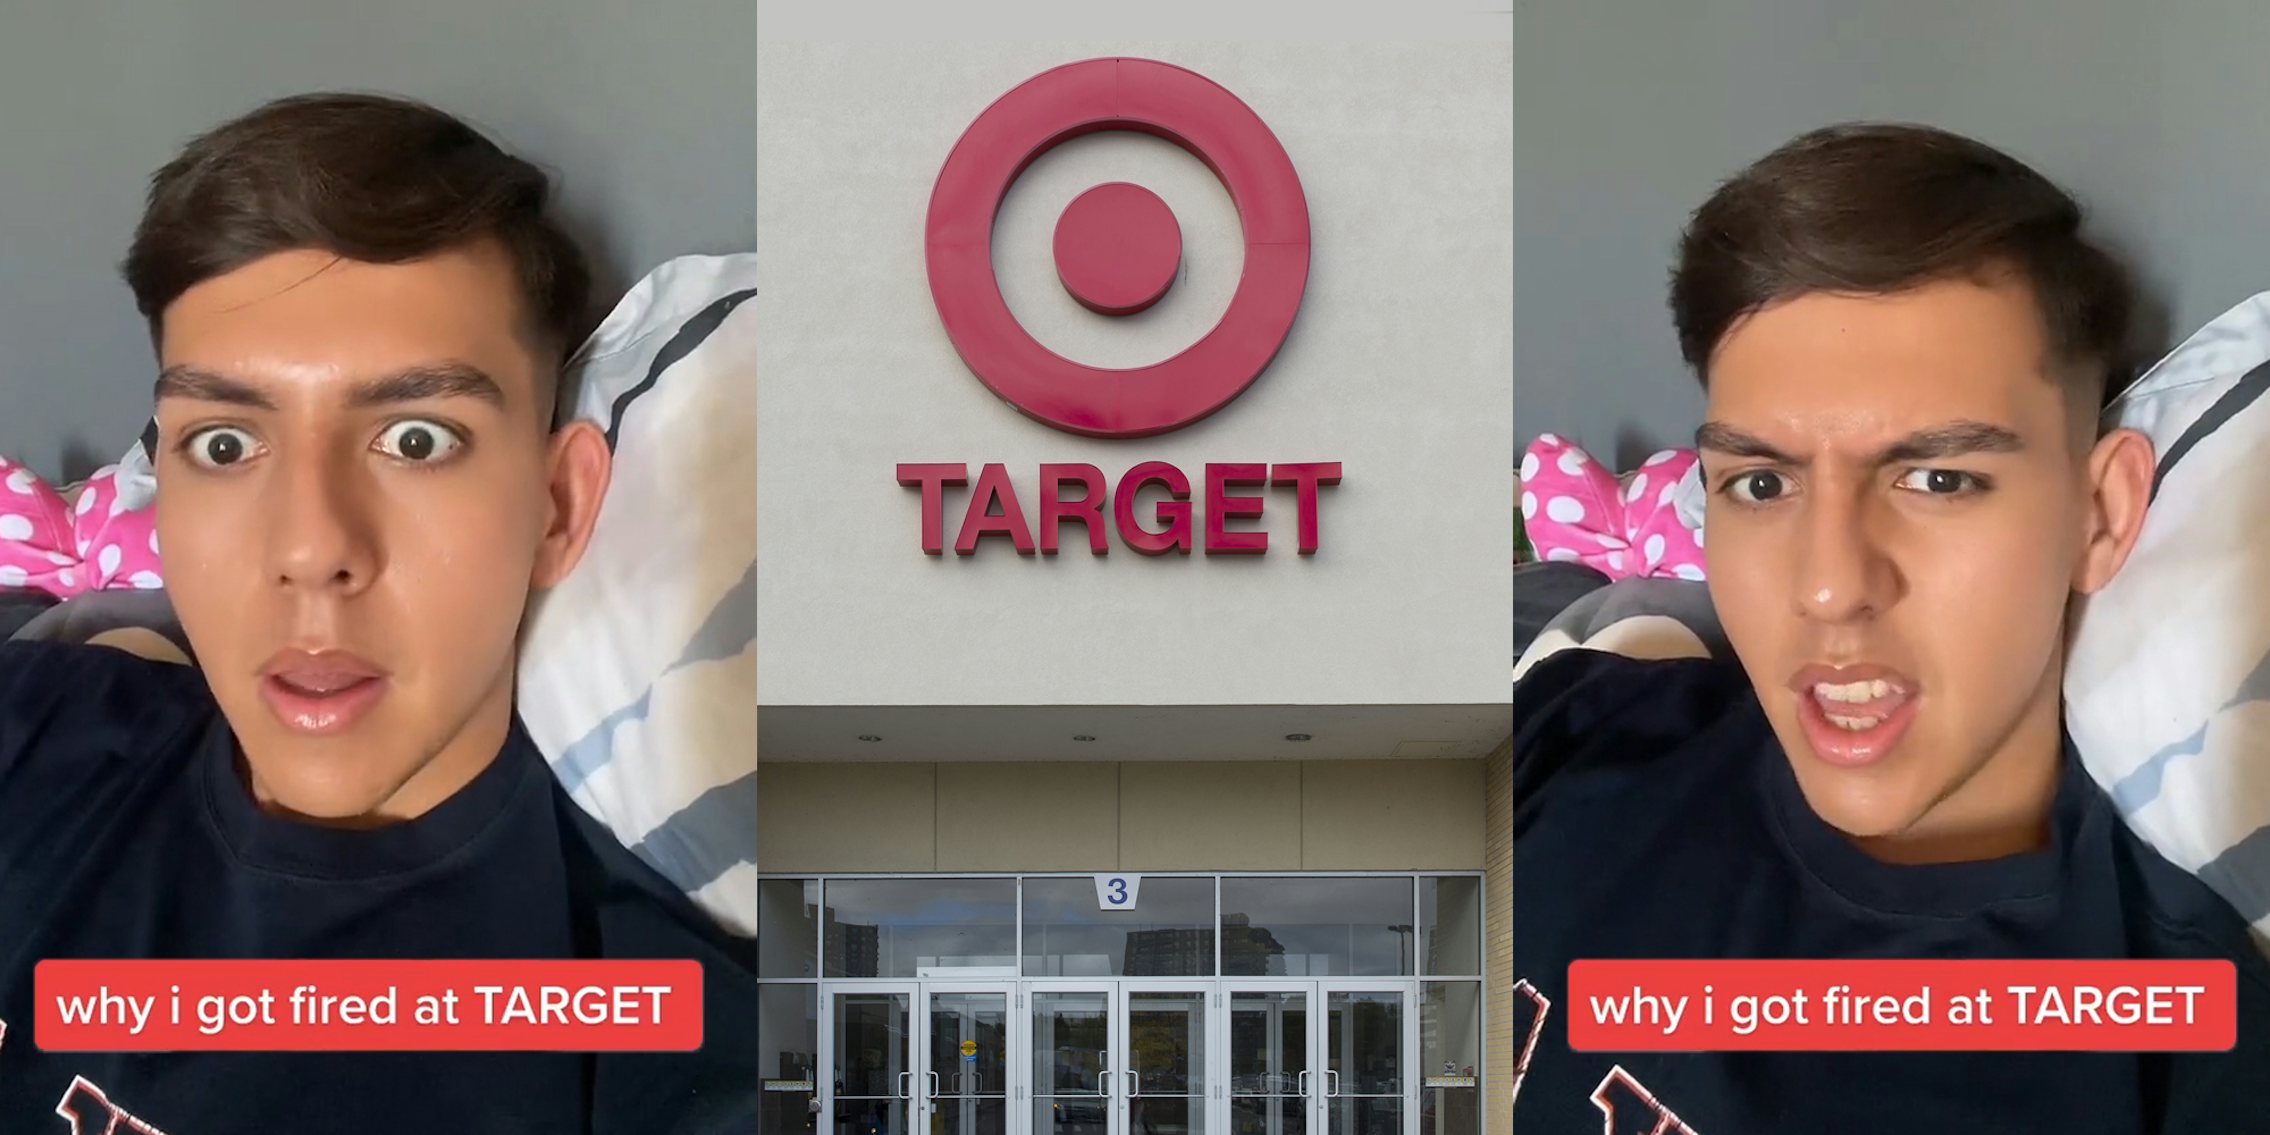 man speaking caption 'why i got fired at TARGET' (l) Target store with sign (c) man speaking caption 'why i got fired at TARGET' (r)